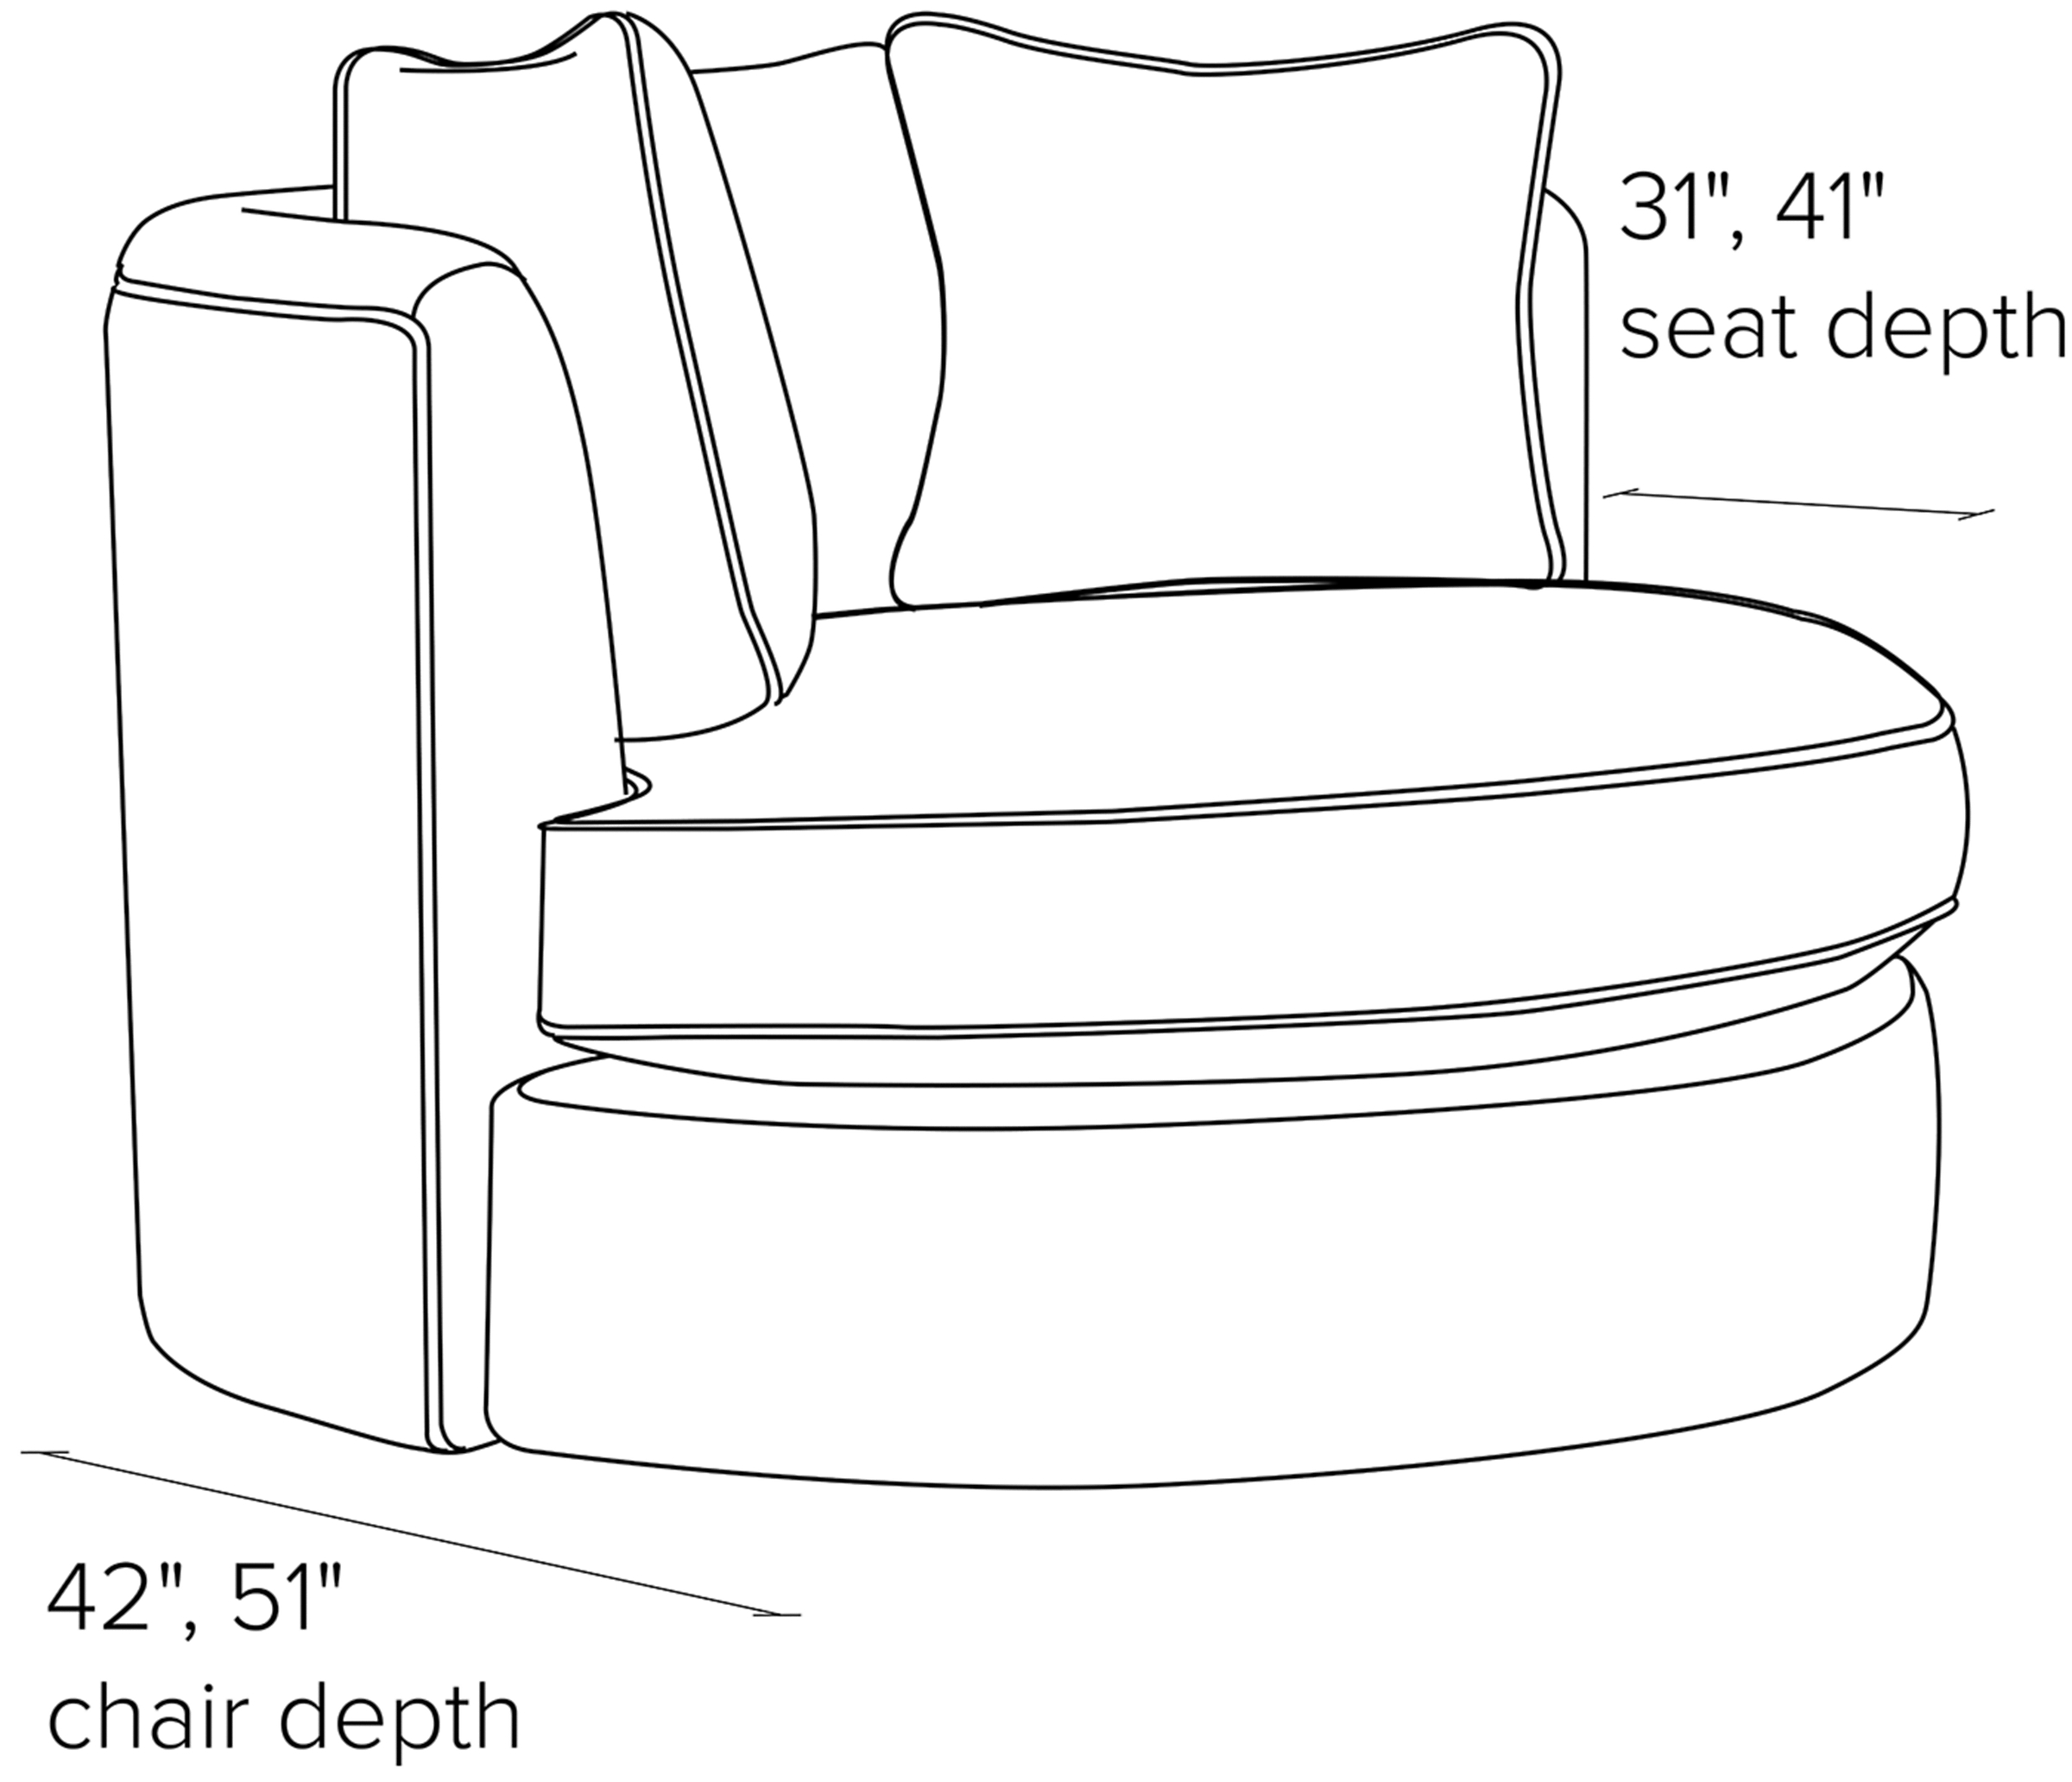 Side view dimension illustration of Eos swivel chair.